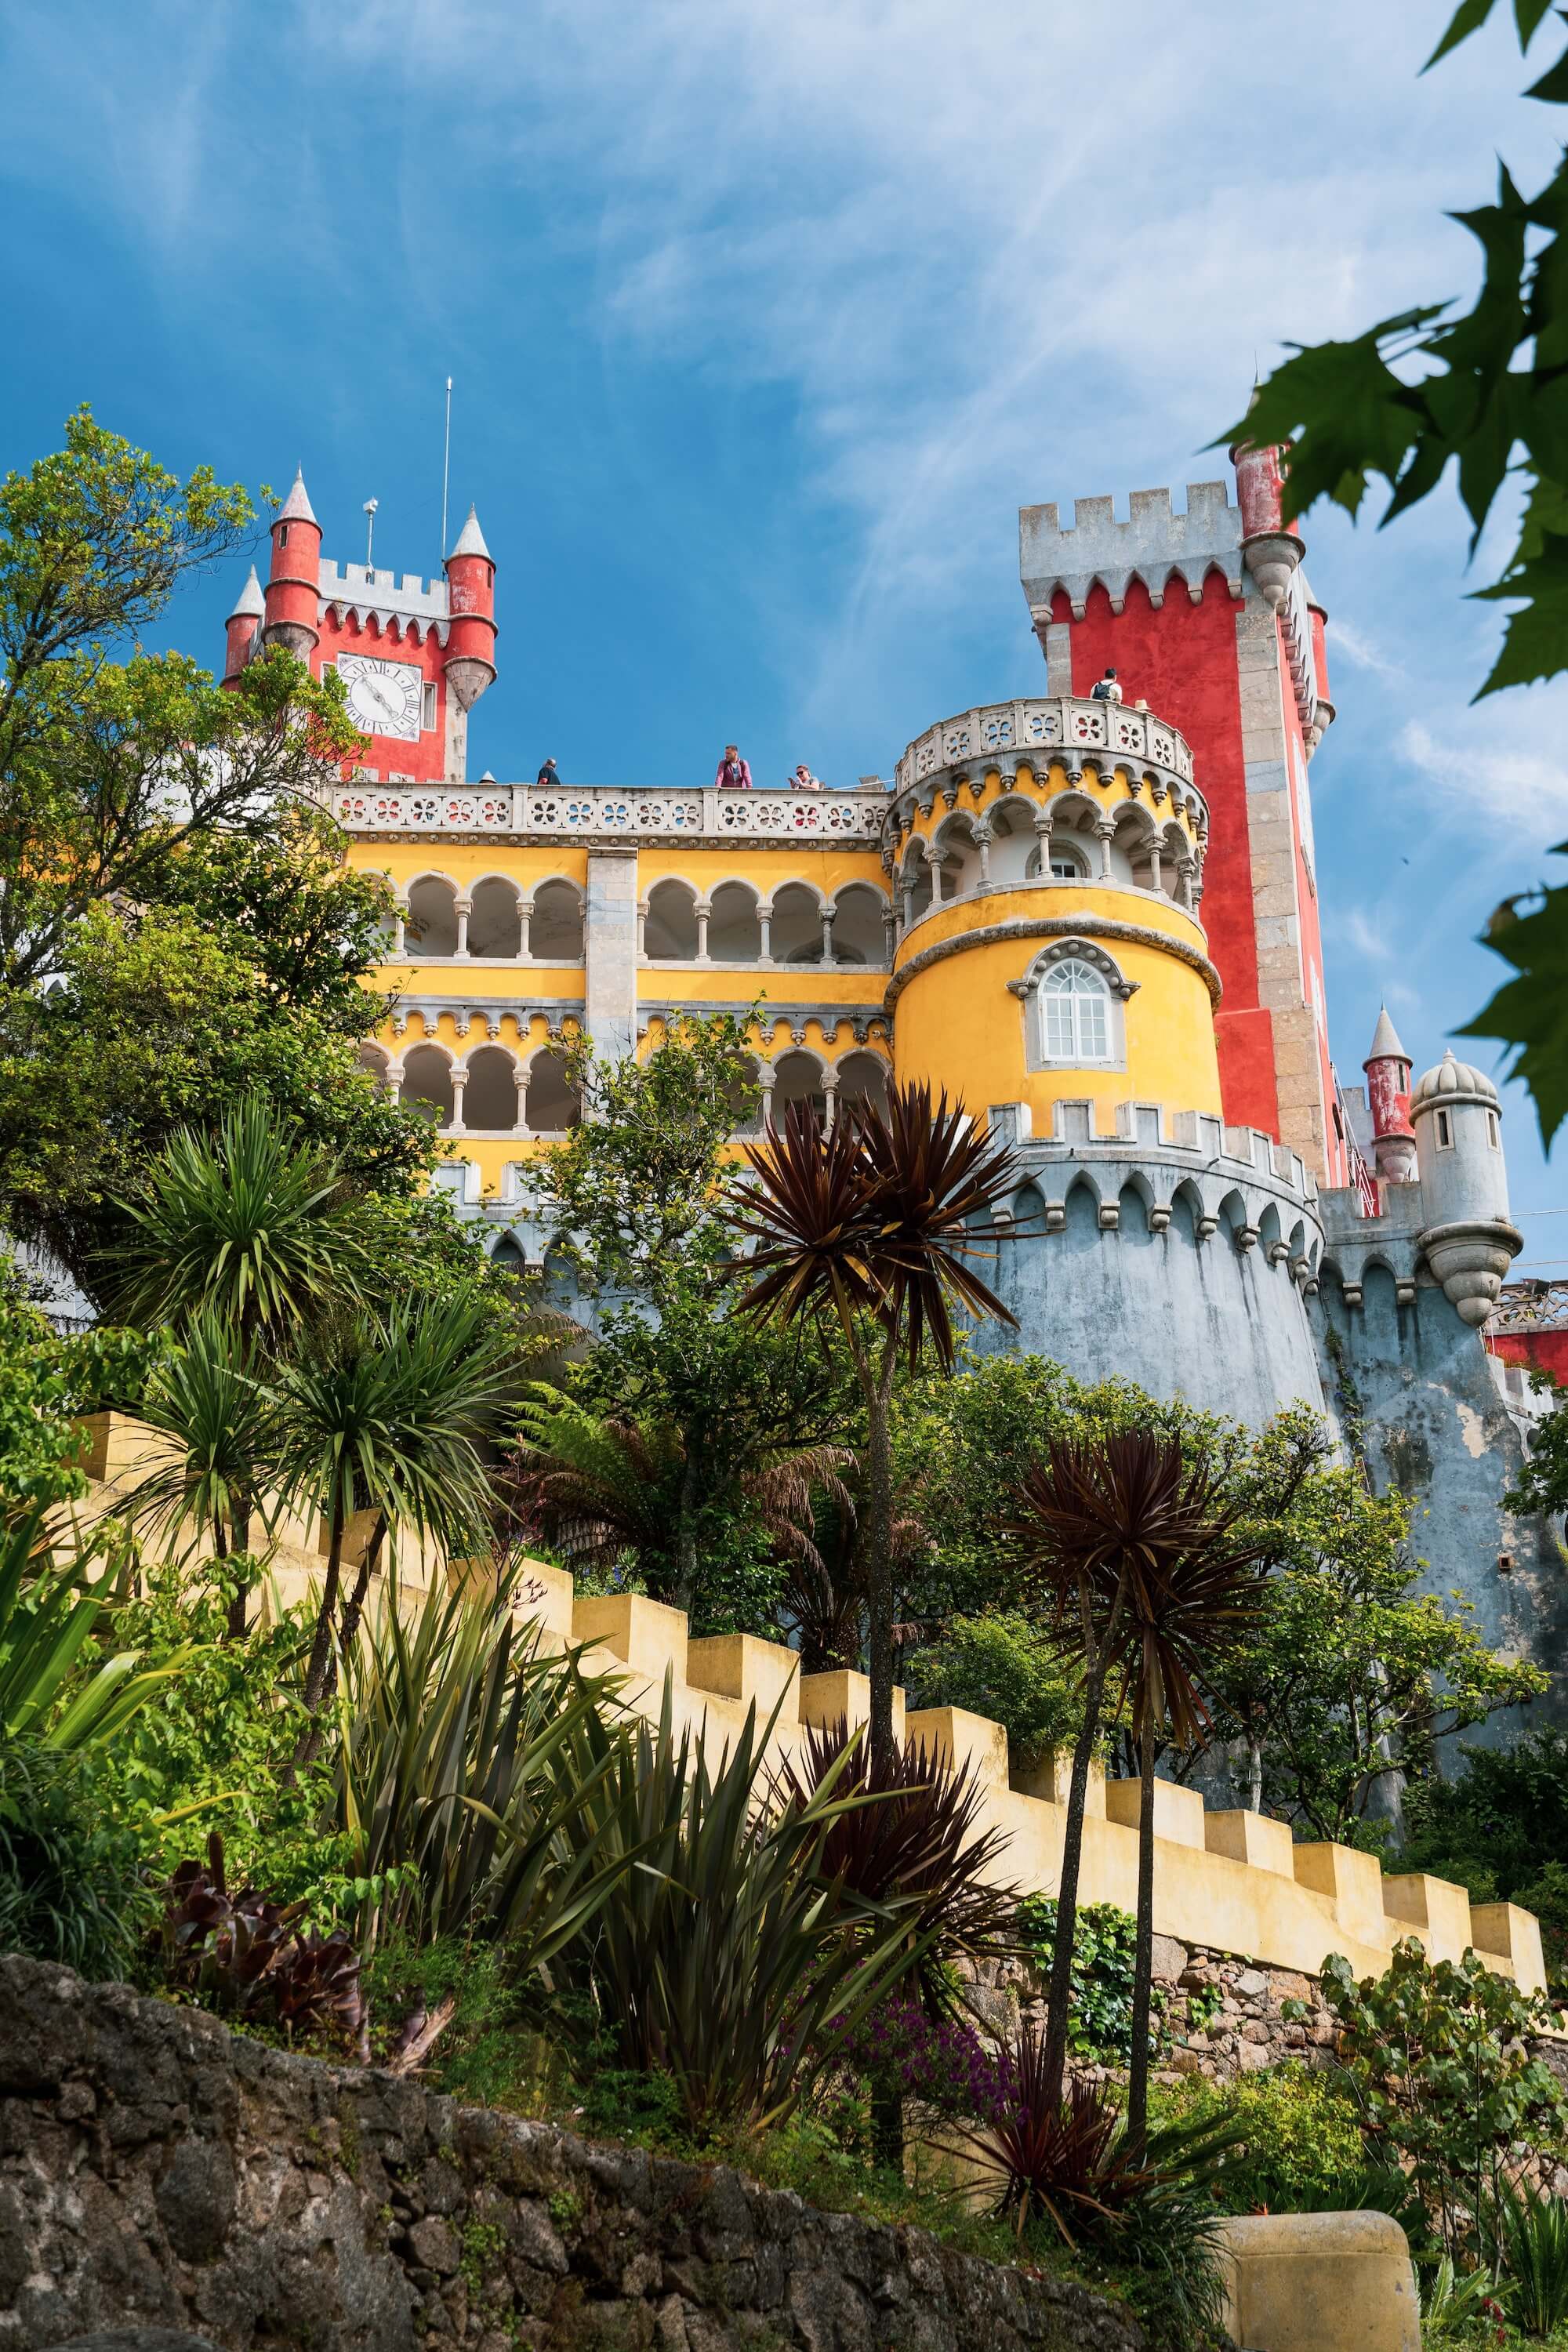 A castle in Sintra, Portugal